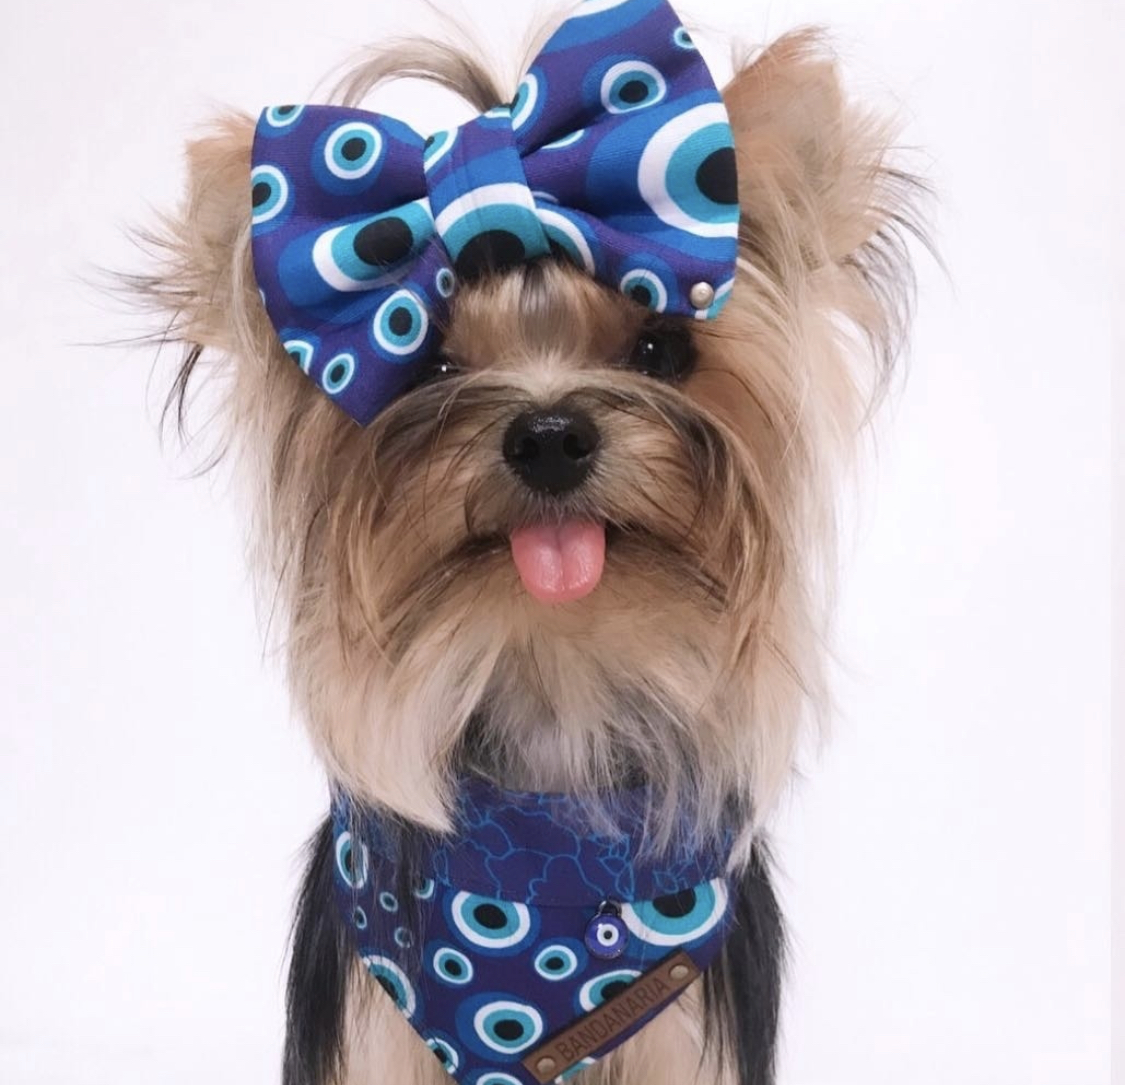 Yorkshire Terrier with its tongue out wearing matching blue ribbon and scarf designed with circle shapes in a white background